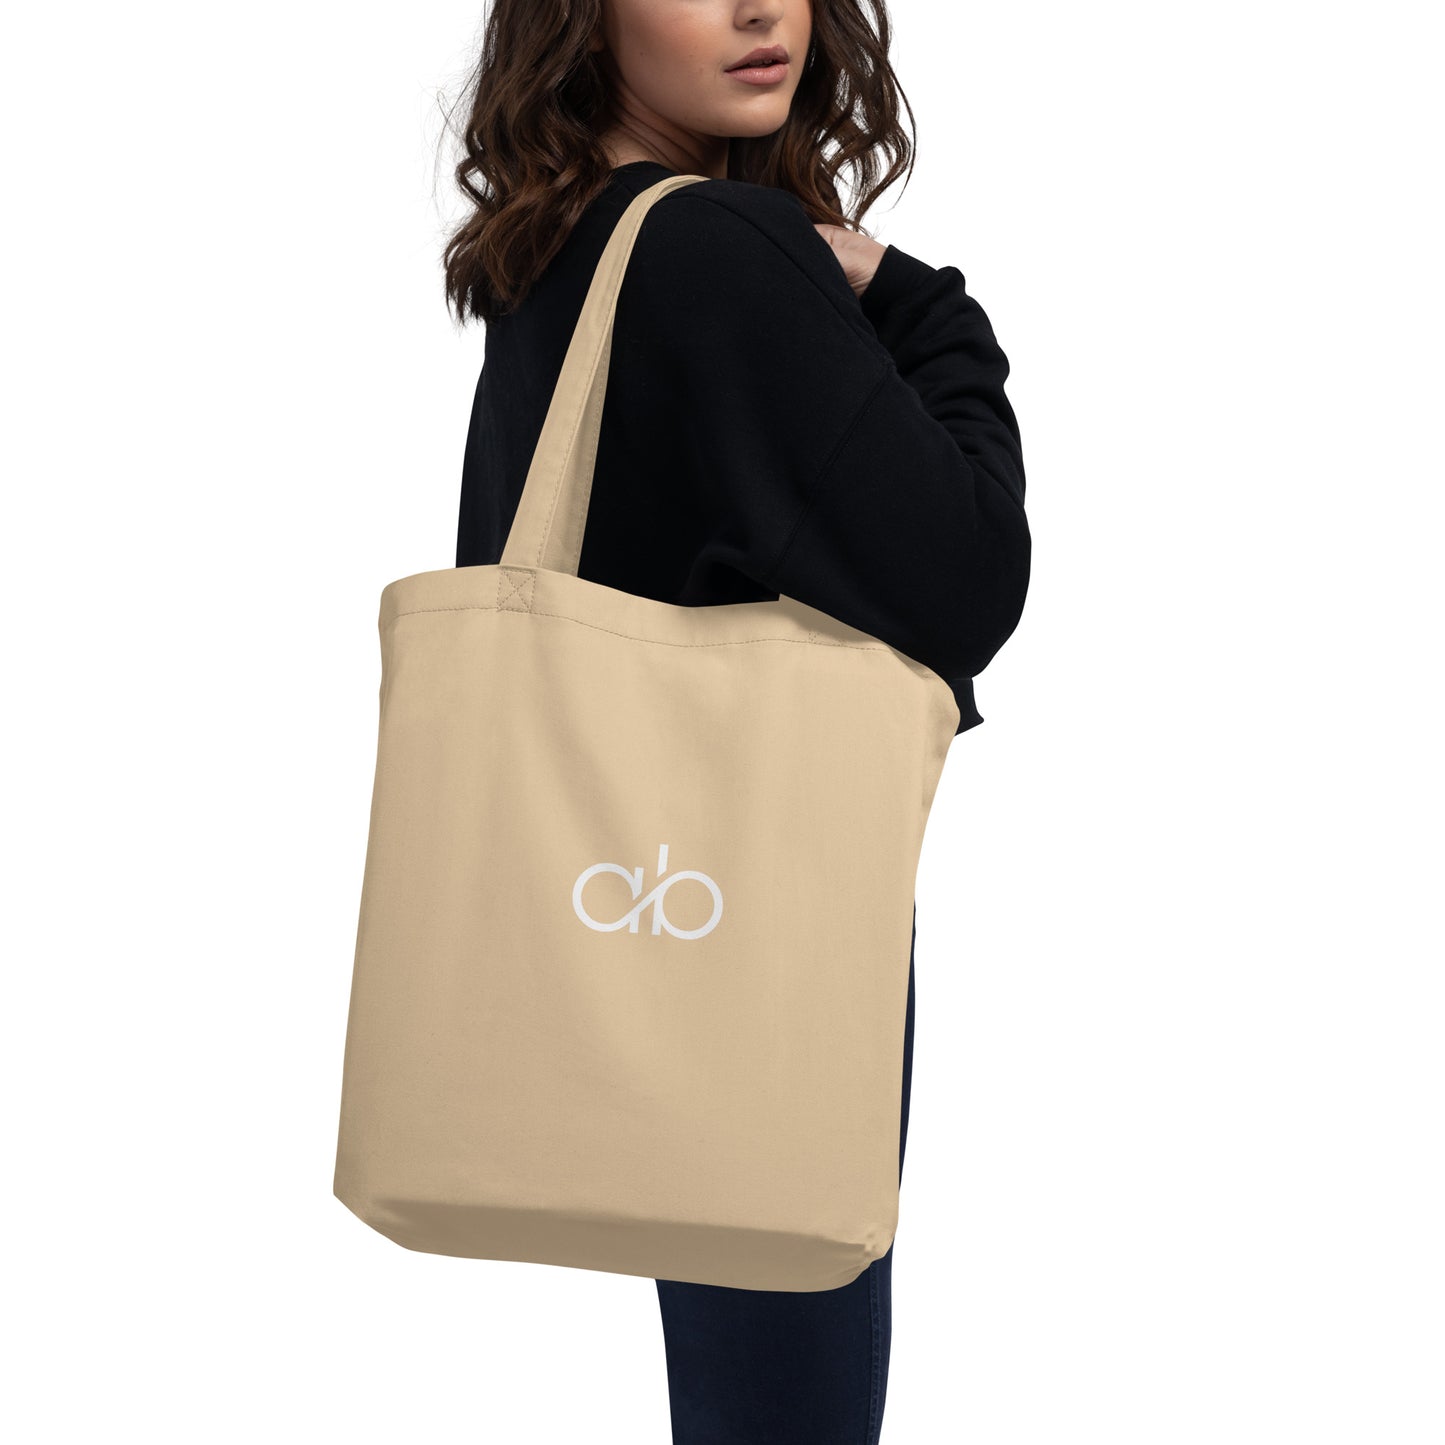 ab blessed up! Eco Tote Bag